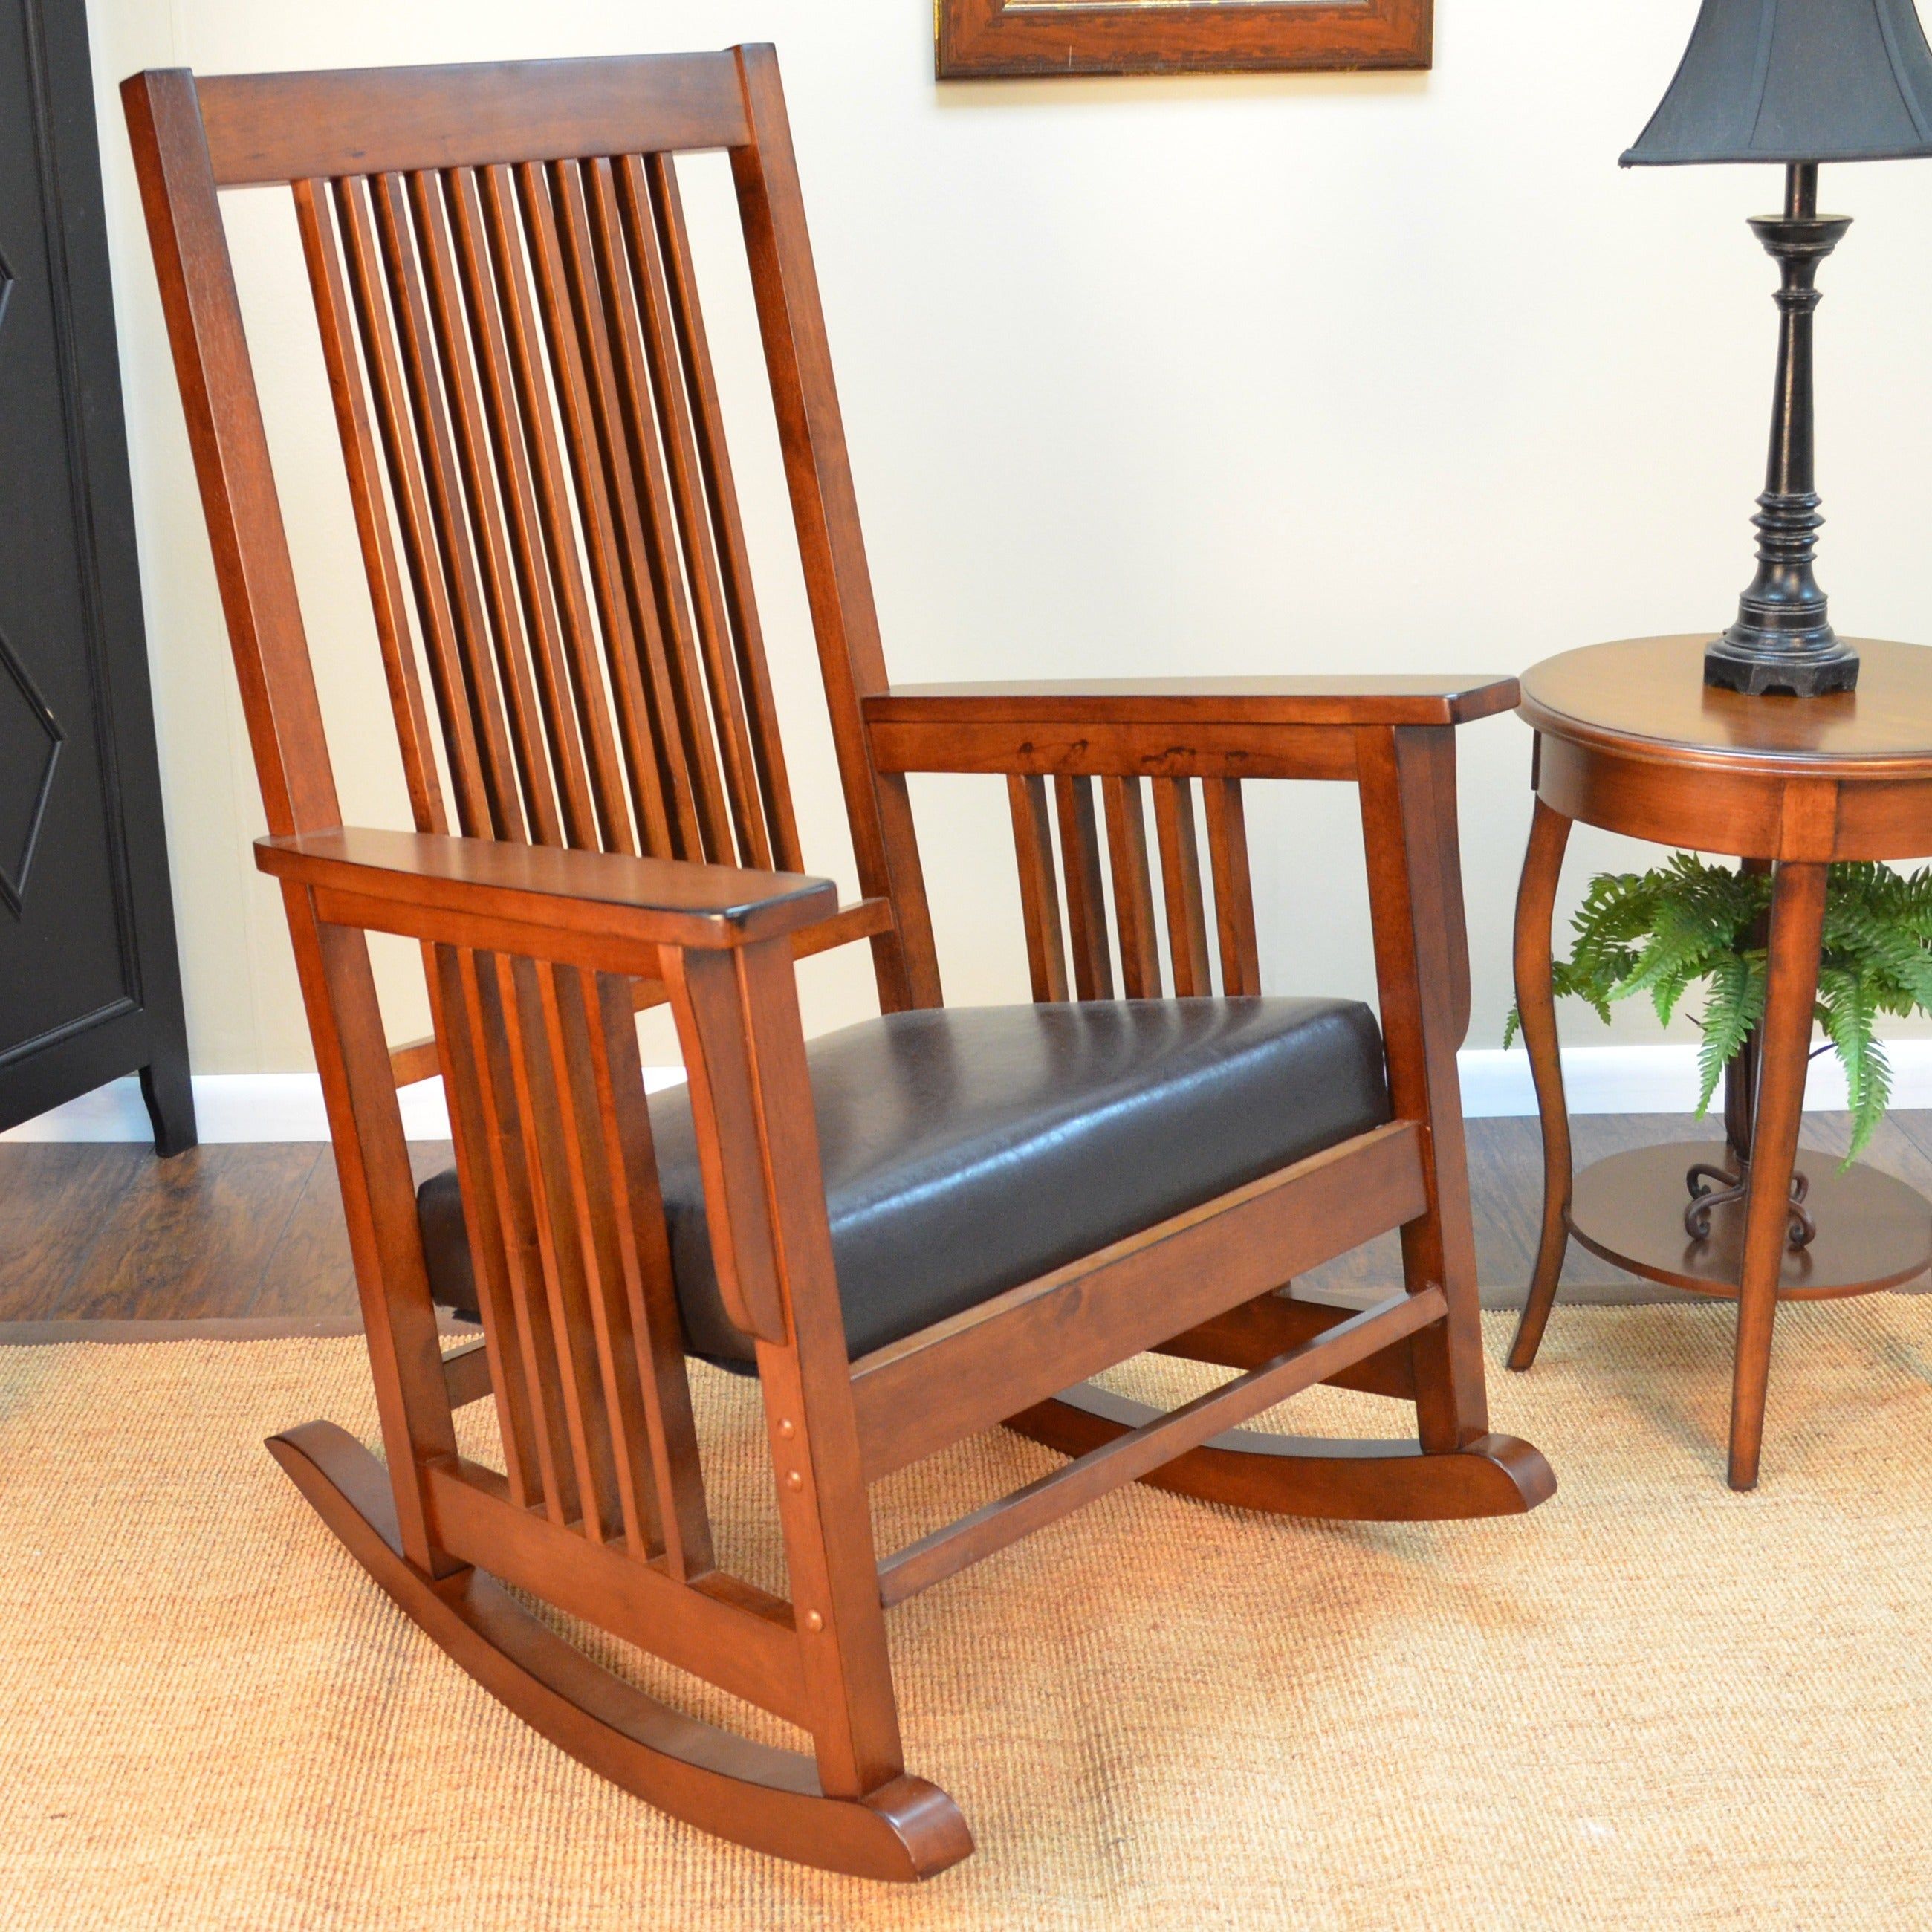 Buy Rocking Chairs, Traditional Living Room Chairs Online At Within Judson Traditional Rocking Chairs (View 5 of 20)